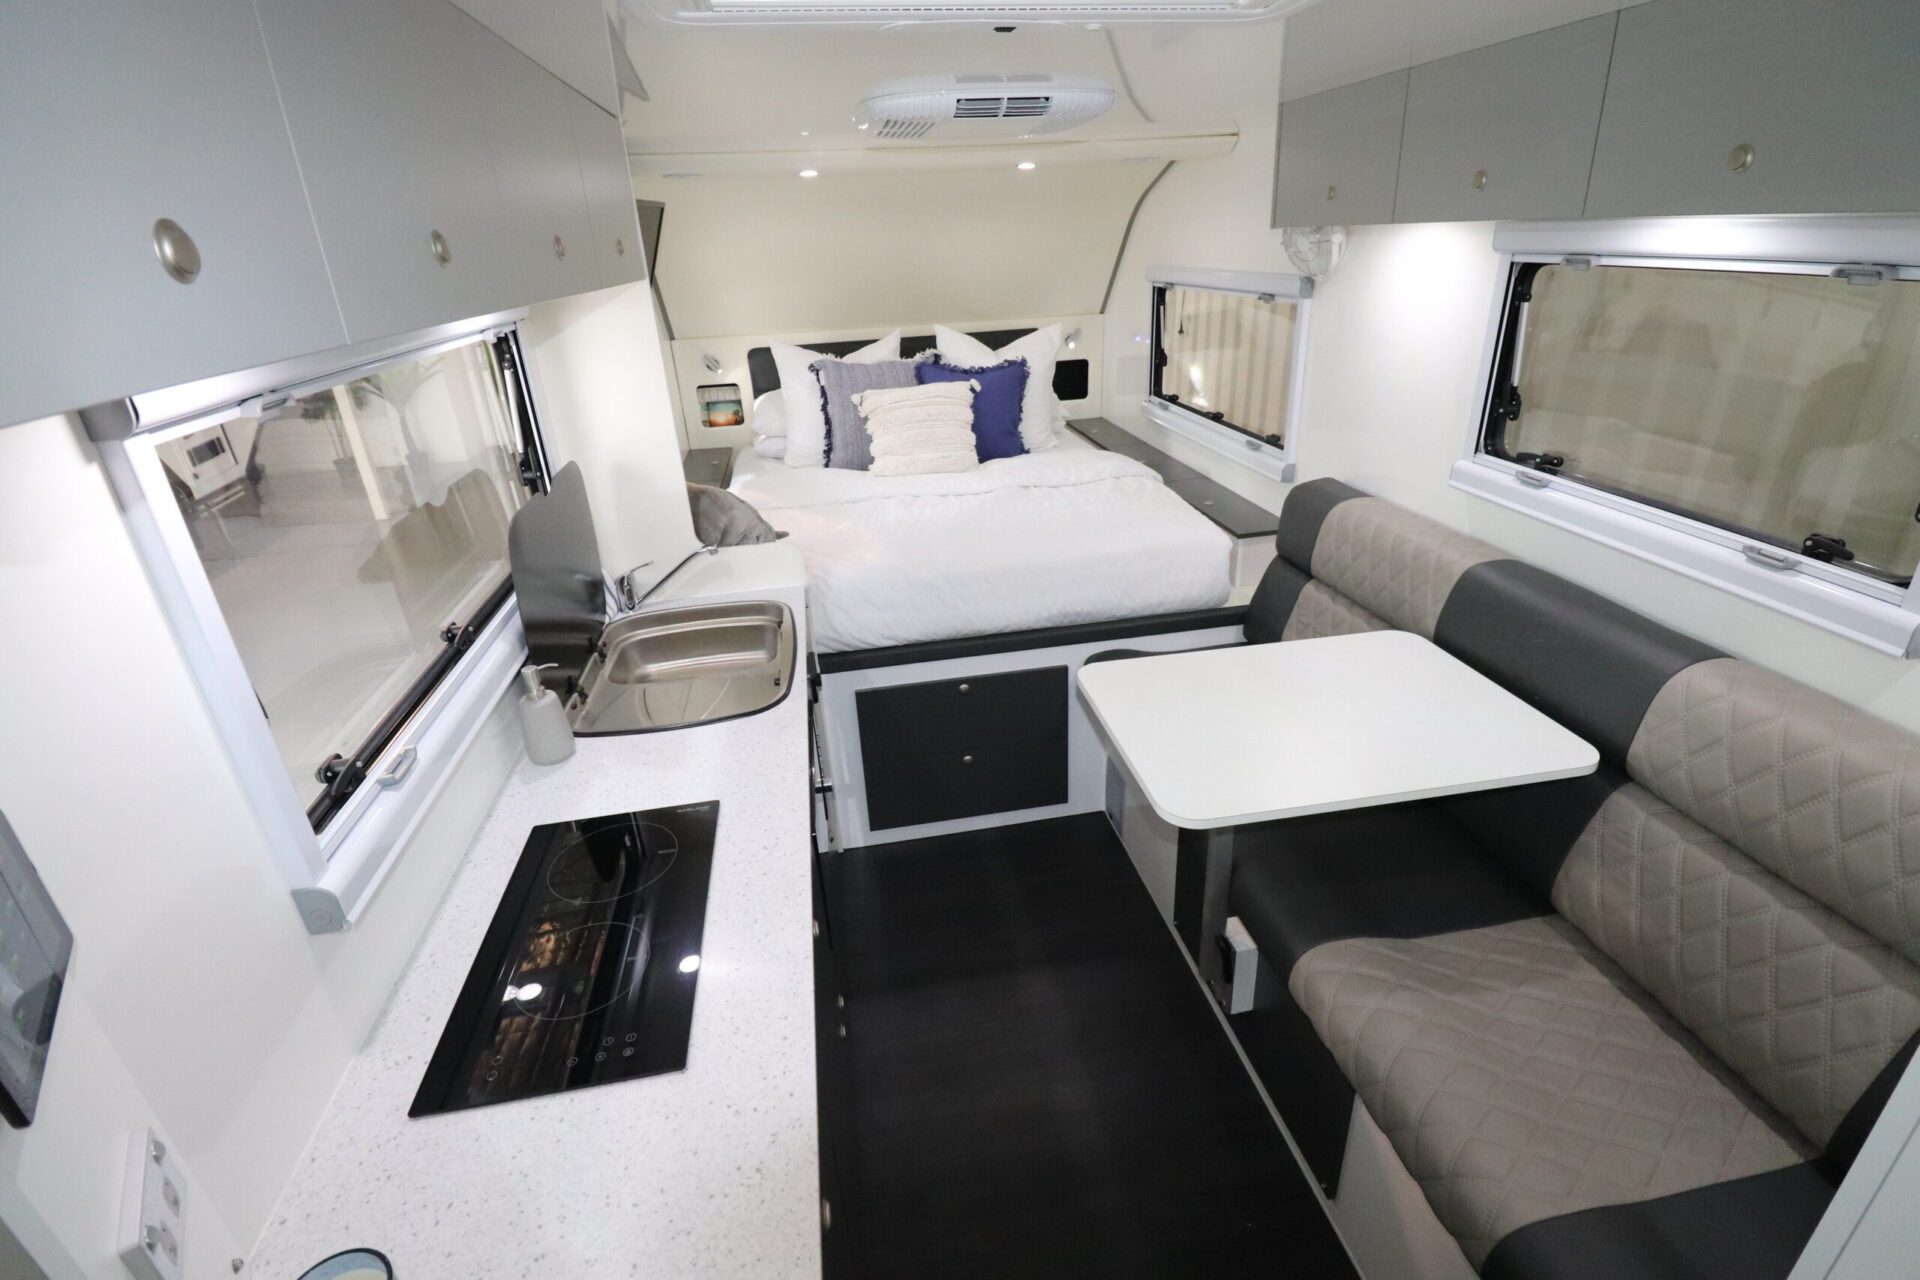 Interior Design and Comfort in Hybrid Campers: The Rhinomax Difference